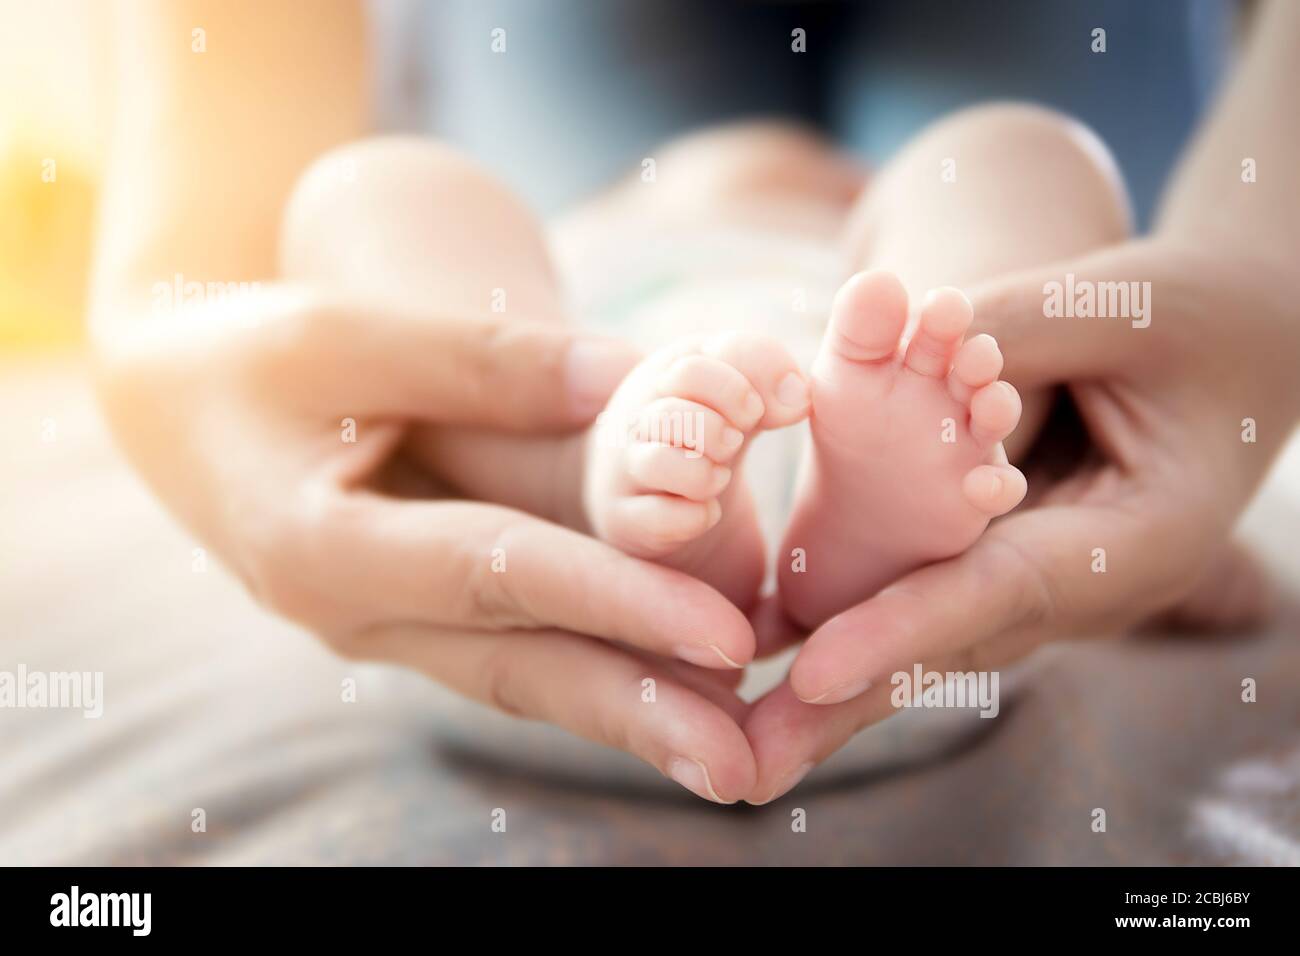 Happy relationship in family concept : Newborn baby feet in mother hands. Parent holding tiny feet of newborn baby in the hands with gentle care Stock Photo